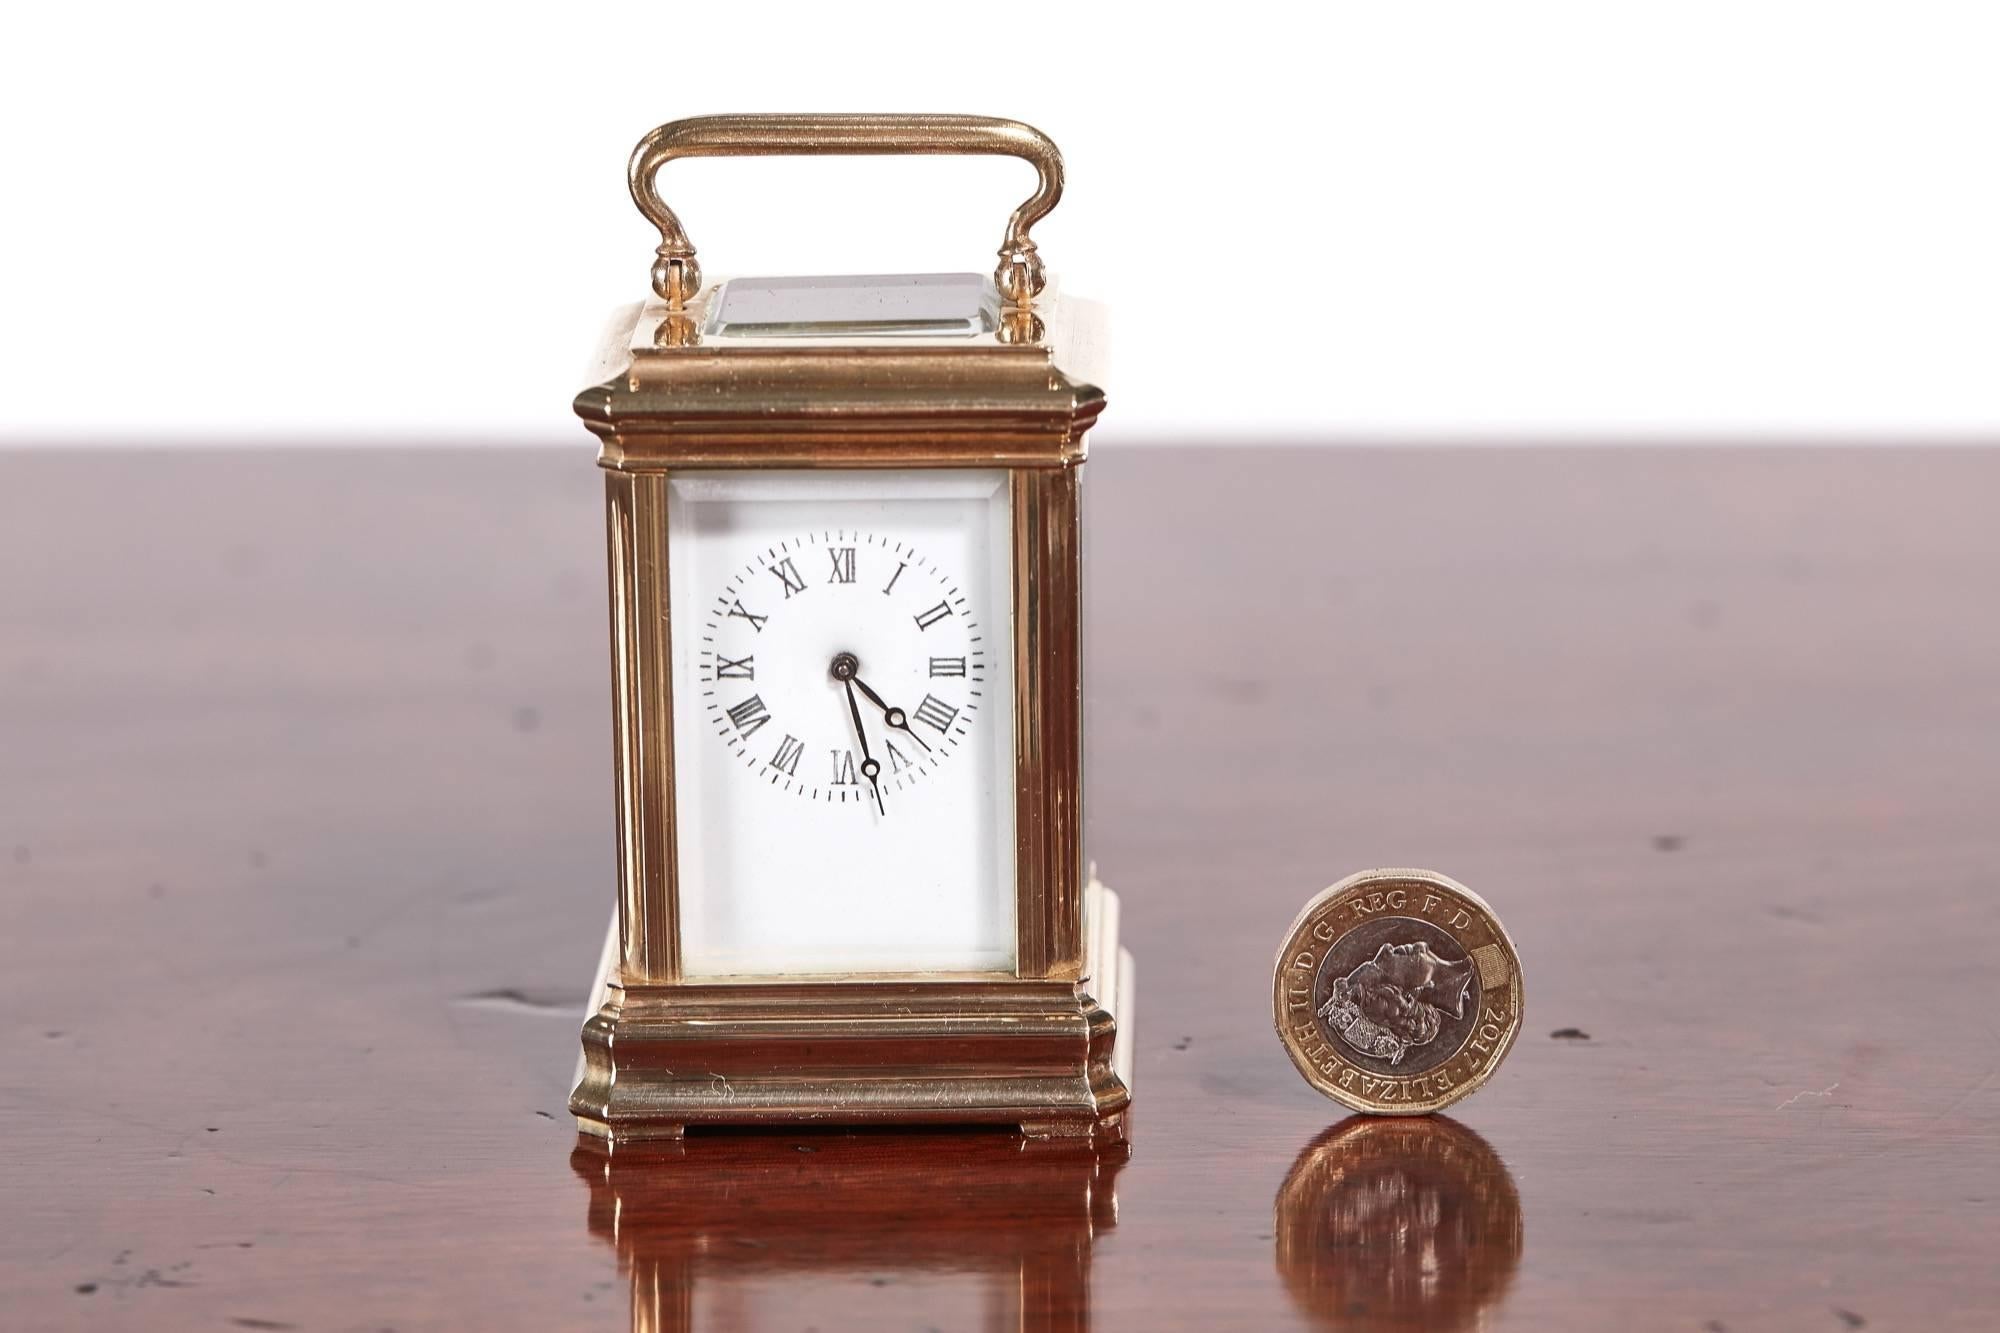 Miniature antique French brass carriage clock, with a porcelain dial and bevelled edge glass to each side, in good working order.
Original condition
Measures: 2